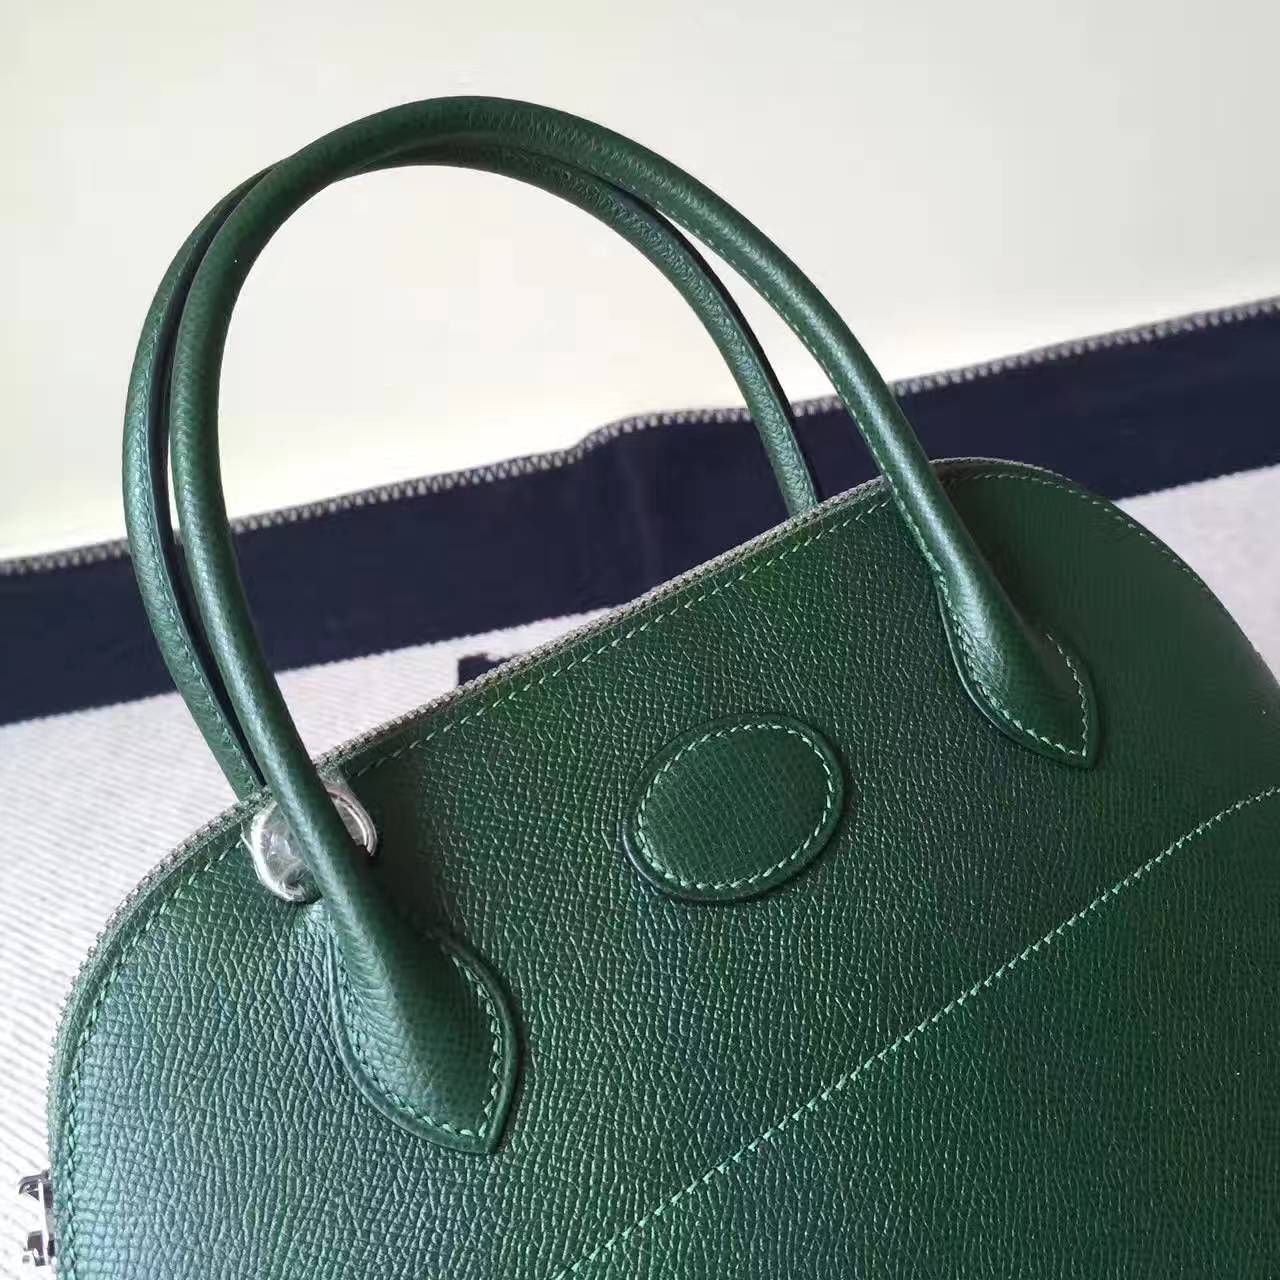 Discount Hermes Bolide Bag 27cm in 2Q English Green Epsom Leather